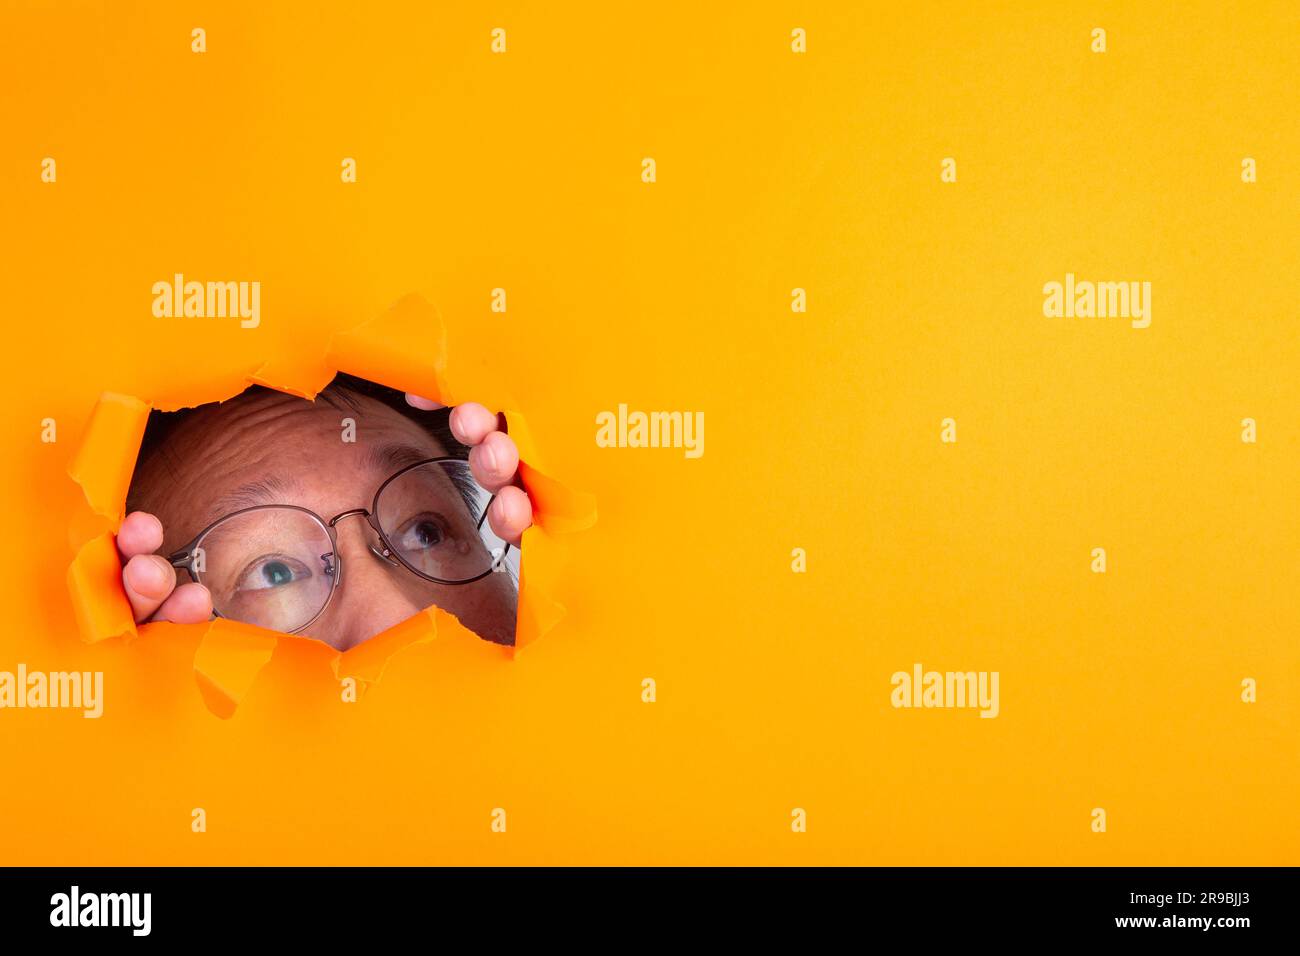 A man wearing glasses peaking through a hole in orange paper Stock Photo